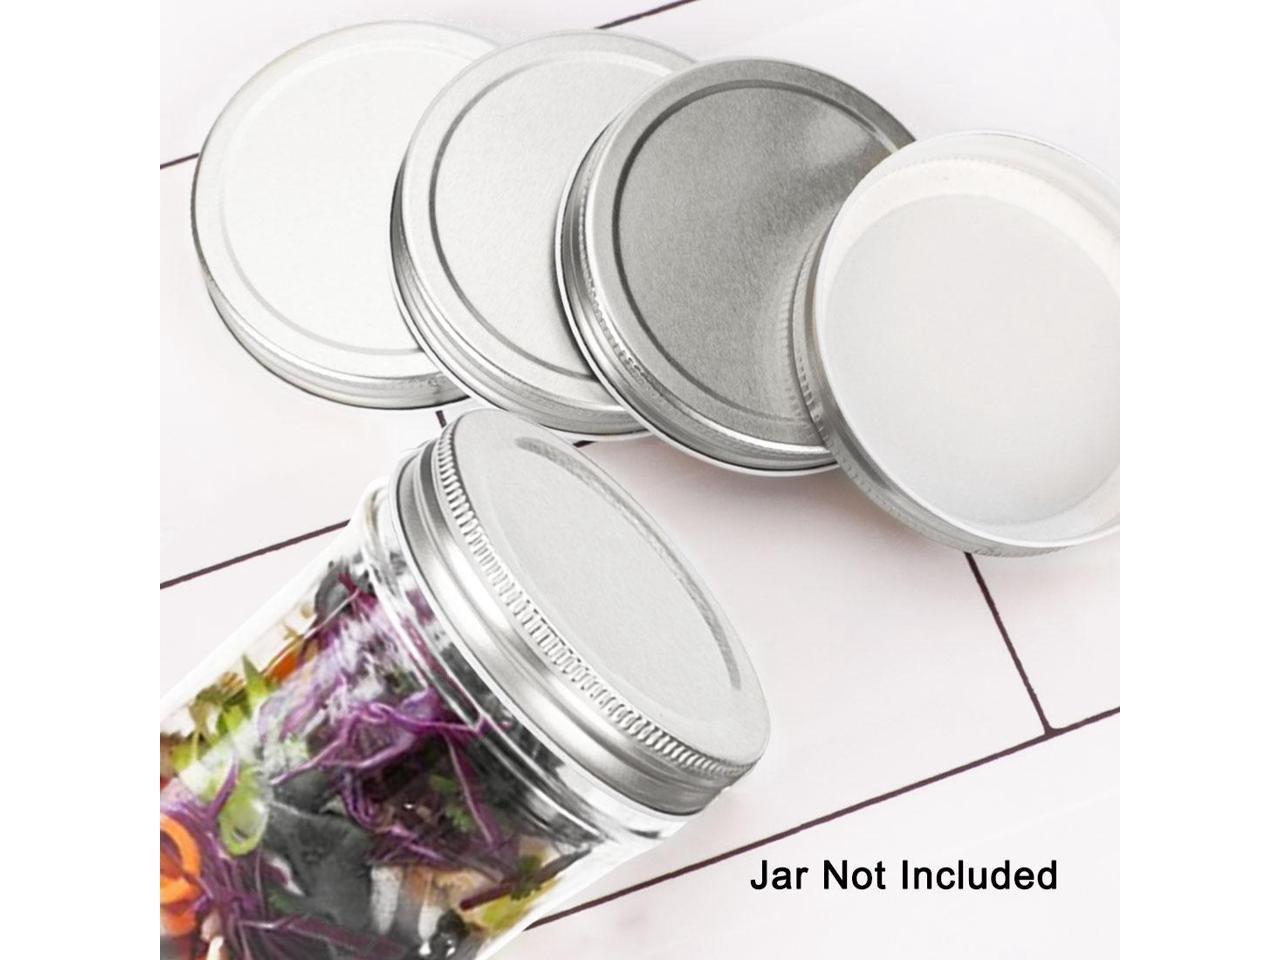 Details about   .10/20x CANNING JAR LIDS & RINGS SET WIDE MOUTH Tank Cans Ball SILVER/GOLD Kits. 